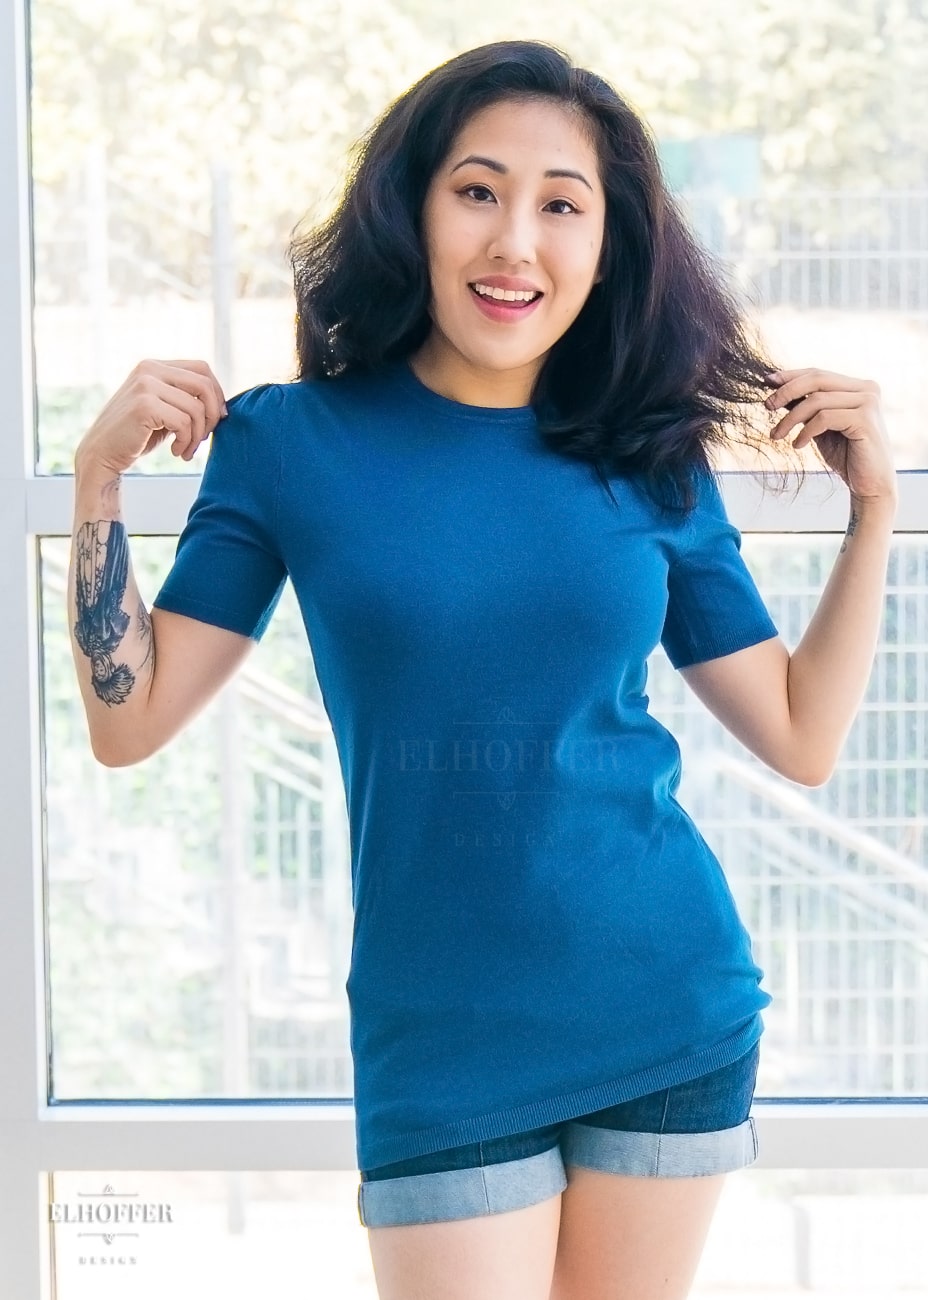 Kate, an olive skinned XS model with long dark hair, is wearing a blue knit short sleeve tee style top. The top has a high round neckline and the hem of the top falls to the hips. The shoulders are slightly gathered.